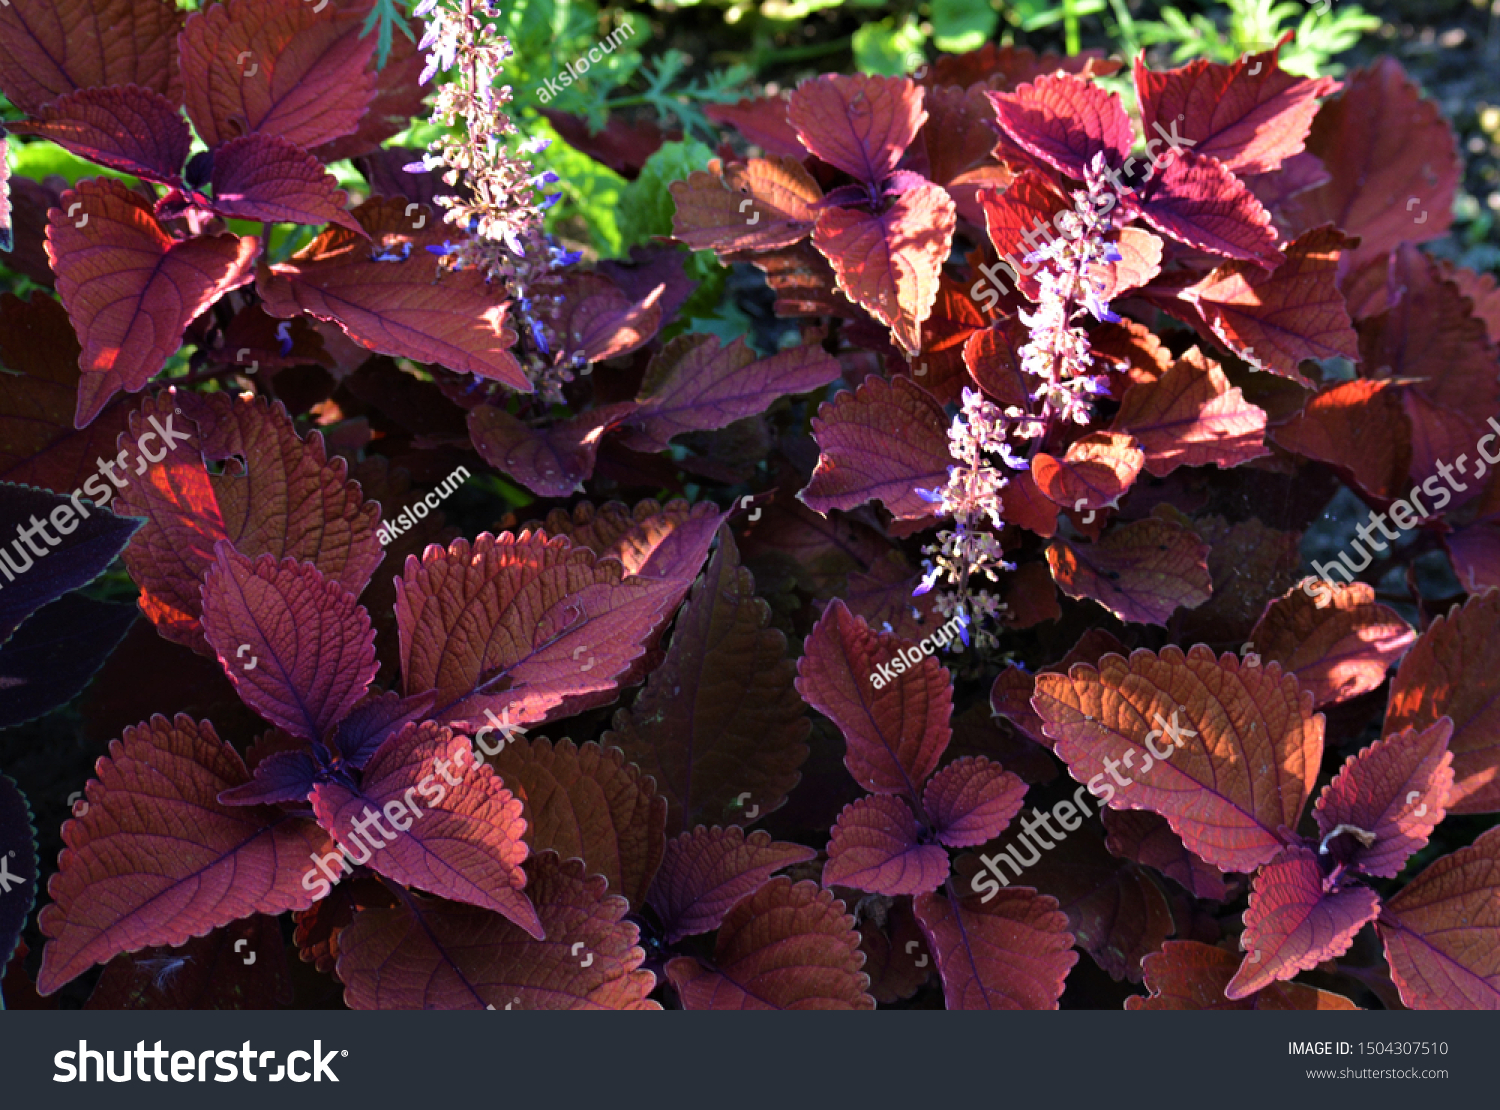 Perilla frutescens var. crispa, or shiso, belongs to the genus Perilla, in the mint family, Lamiaceae. Shiso is a perennial plant that may be cultivated as an annual in temperate climates. #1504307510